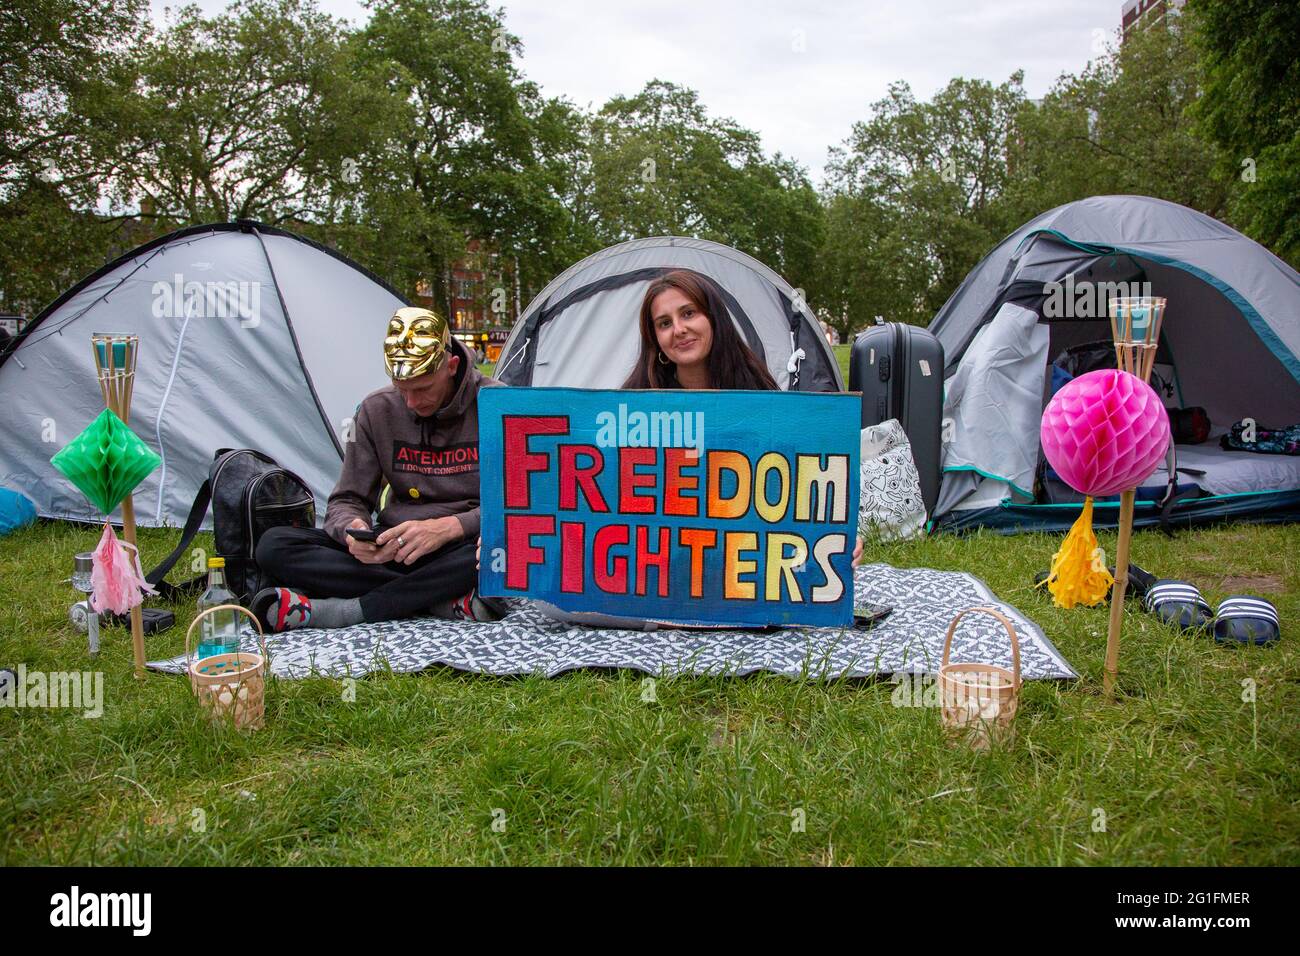 'Freedom Fighters' - a young woman holding up her sign at a freedom protest camp on Shepherd's Bush Green, London, UK. June 2021 Stock Photo